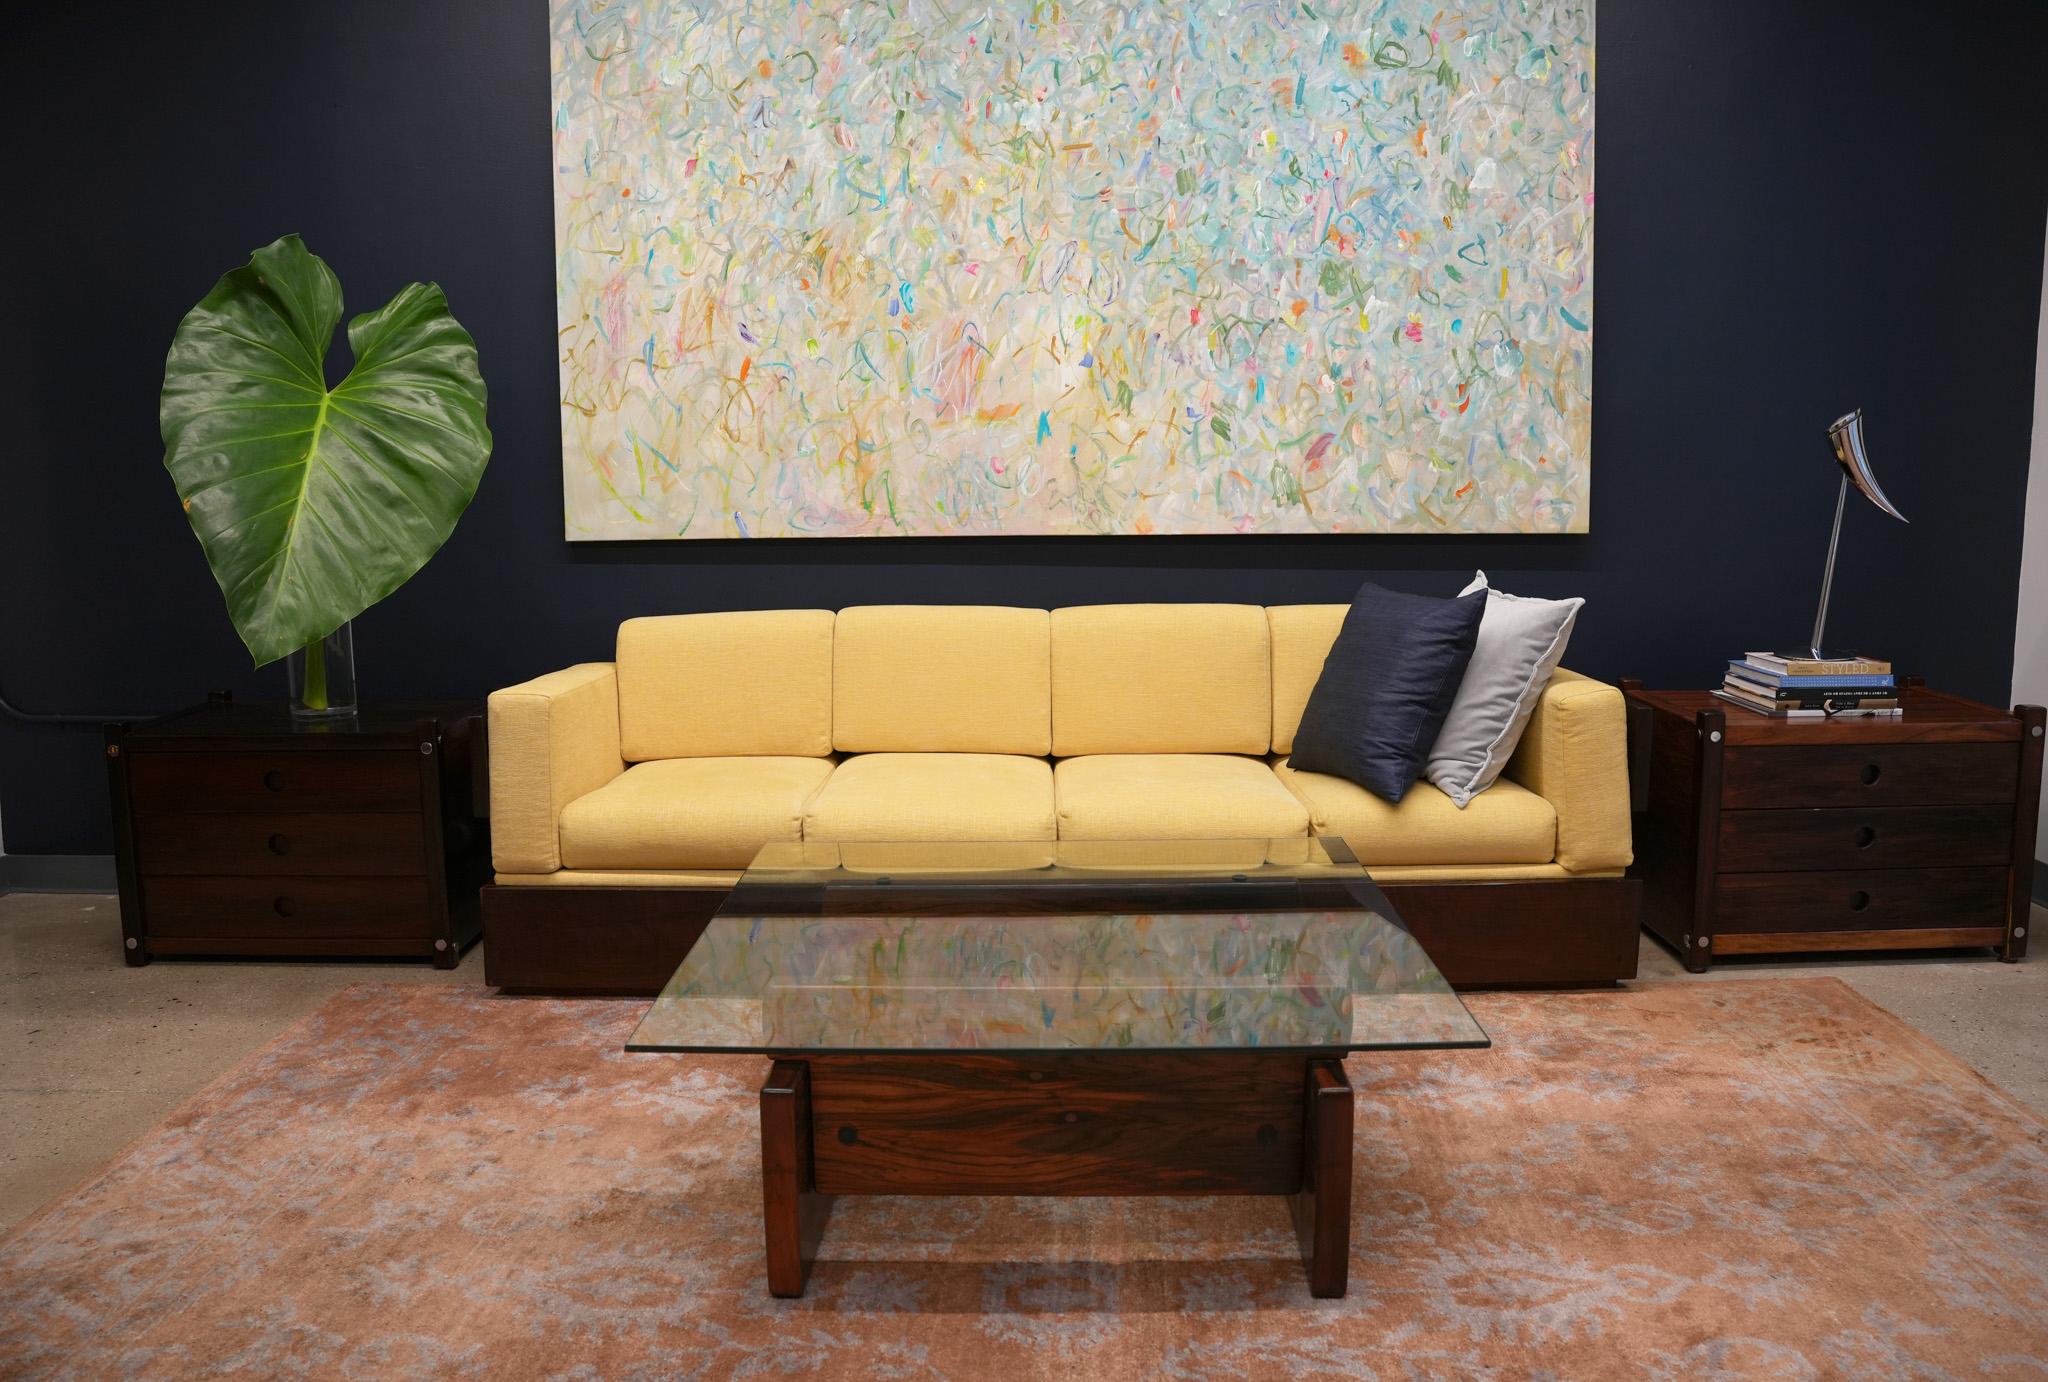 Fabric Brazilian Modern Sofa in Hardwood and Yellow Chenille by Celina, Brazil, c. 1960 For Sale